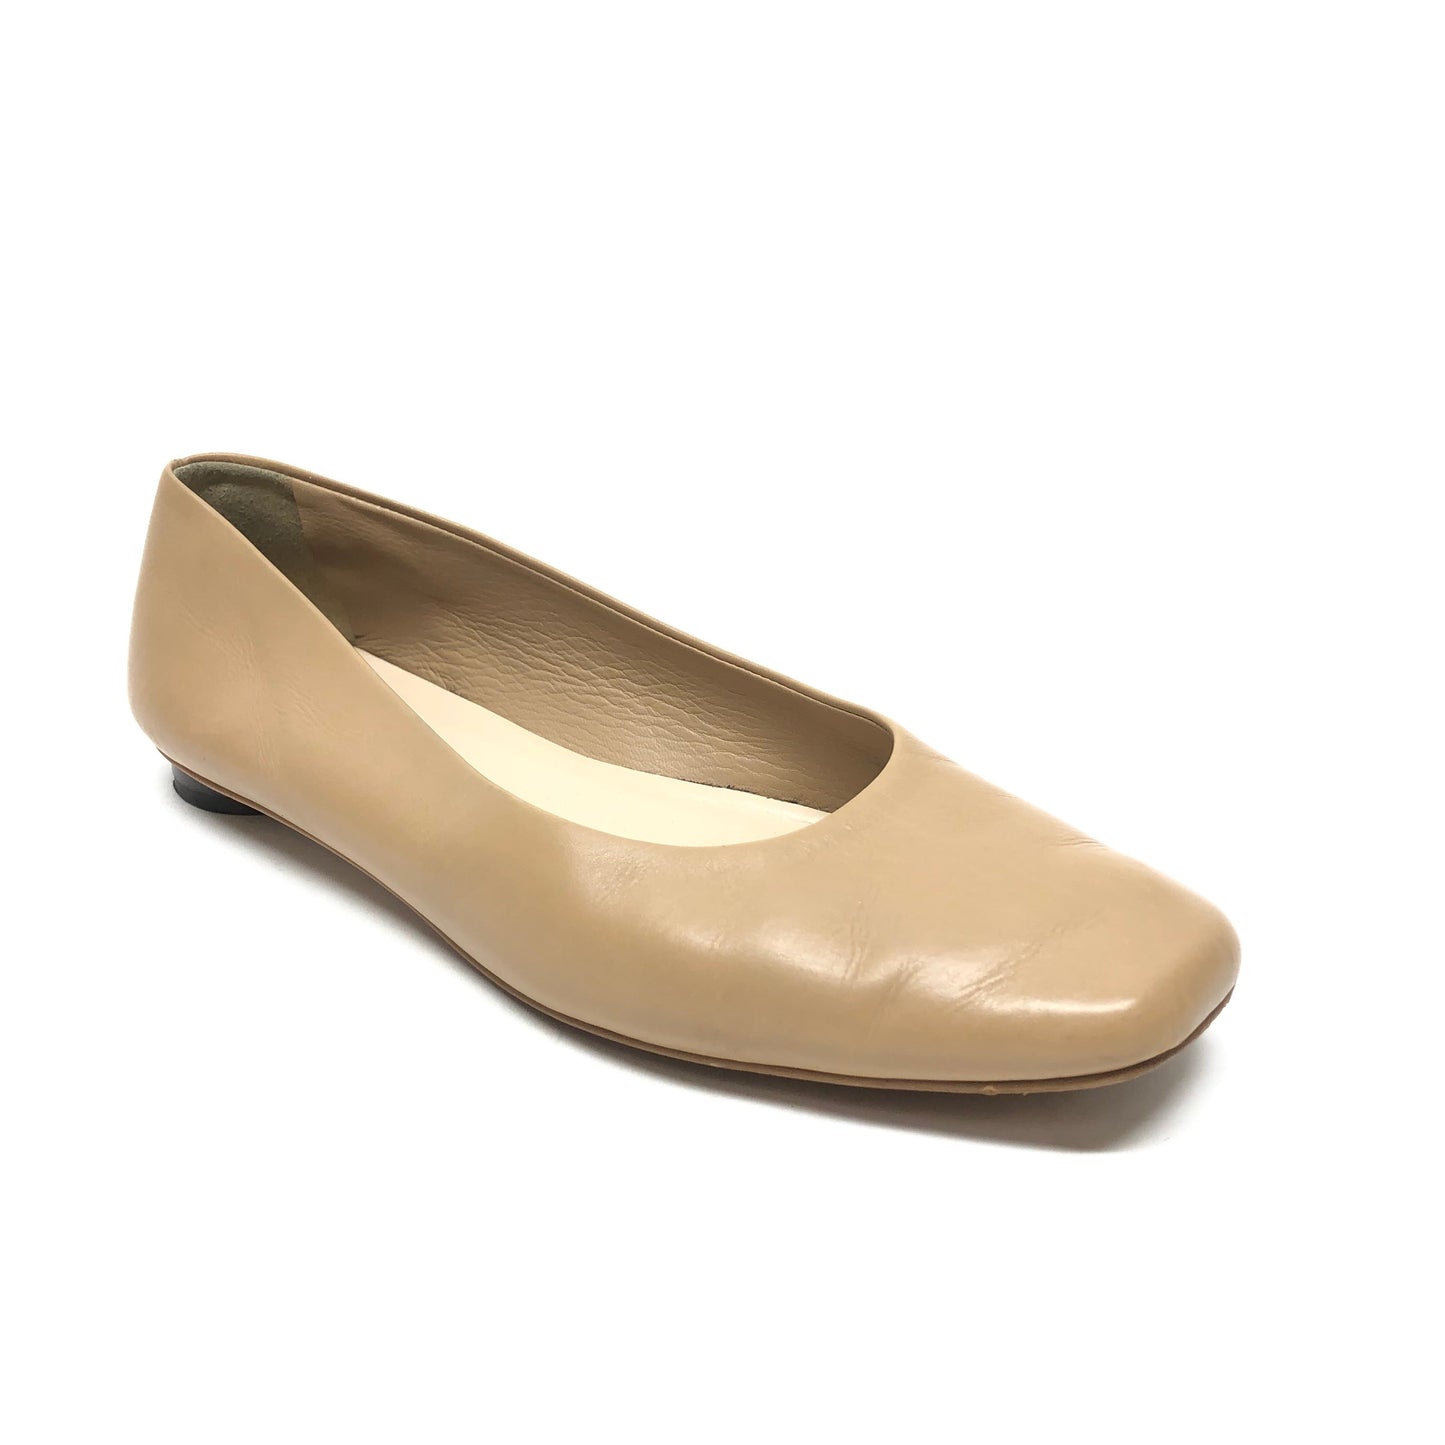 Shoes Flats By Everlane  Size: 8